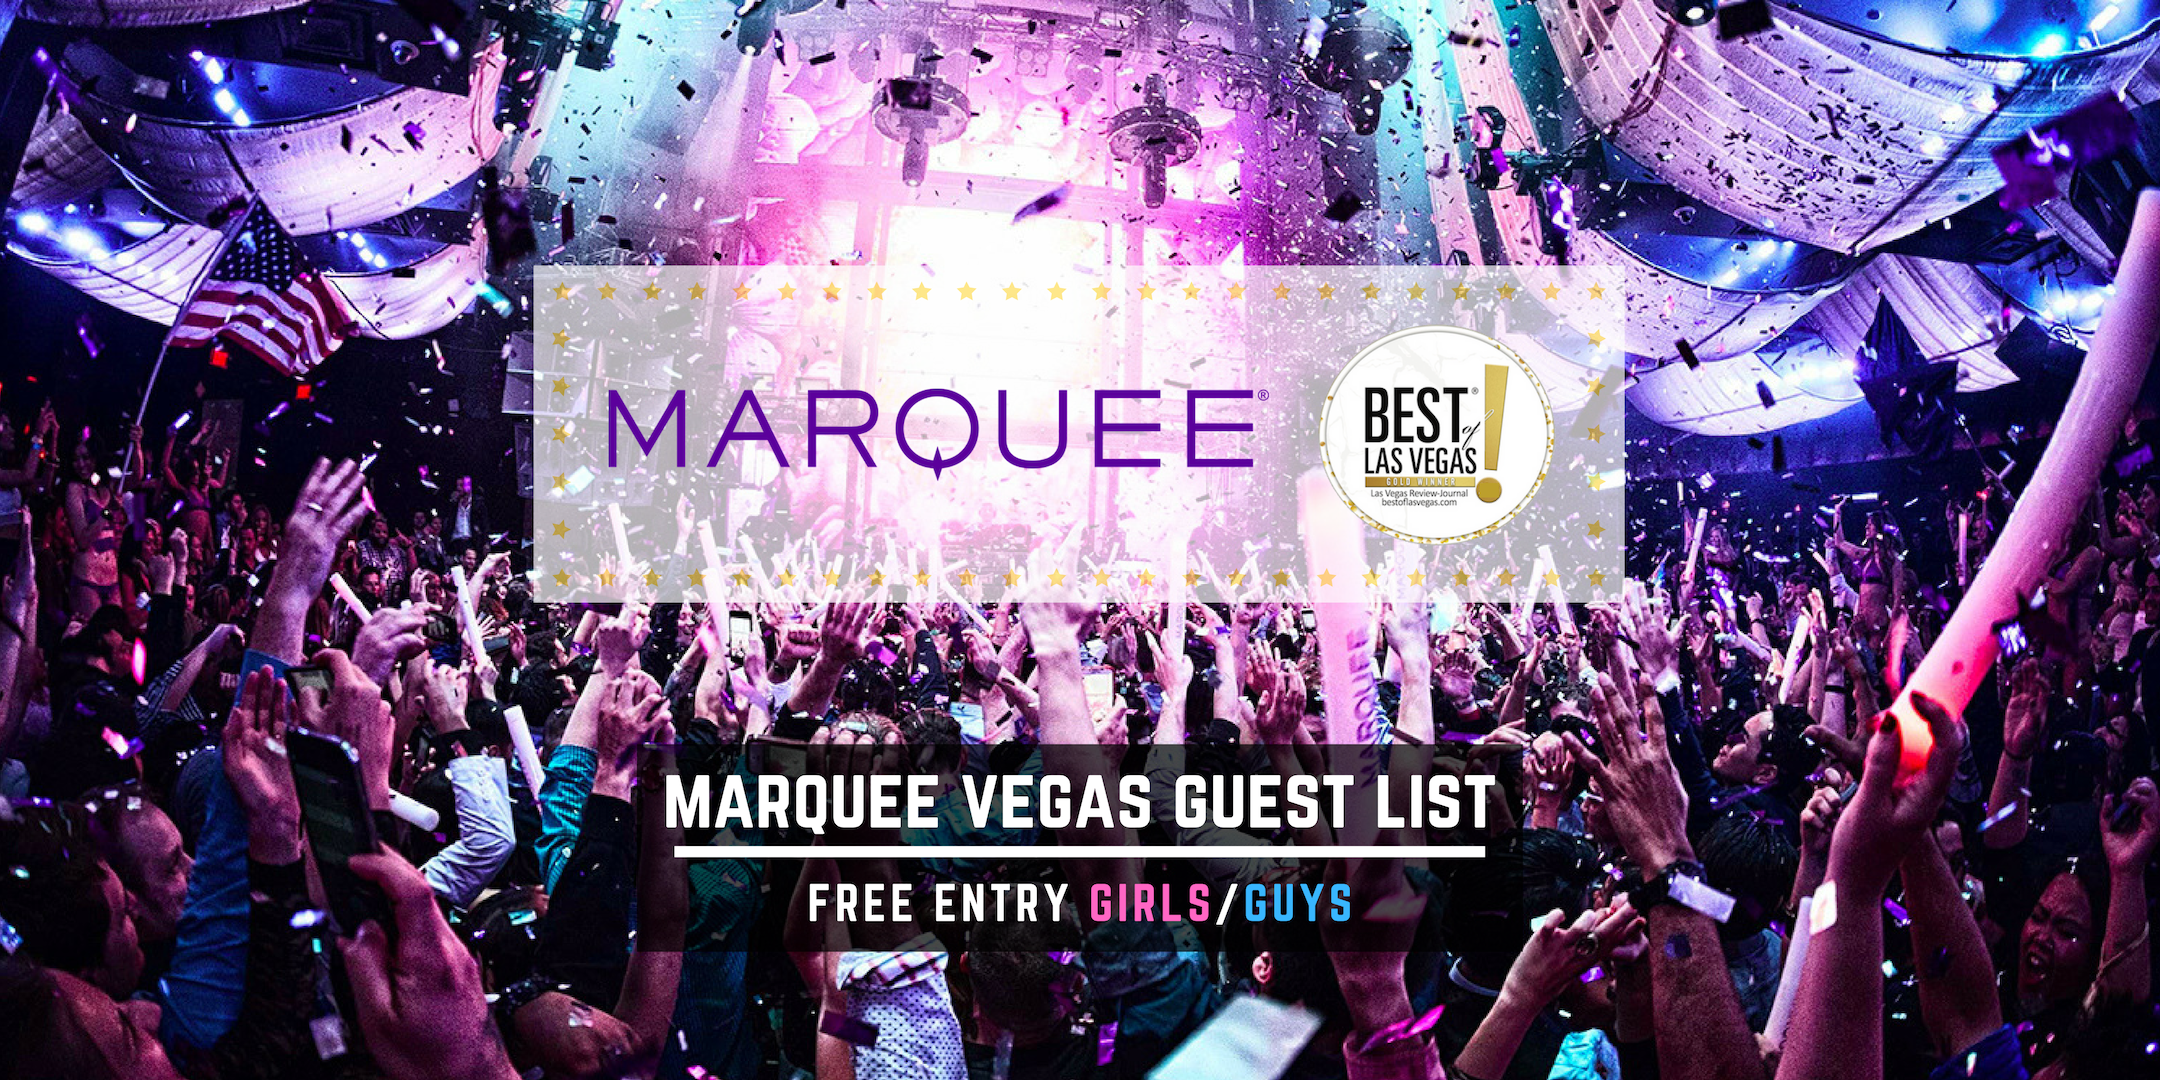 MARQUEE Nightclub - FREE Entry Girls/Guys - Vegas Guest List - #1 Promoters